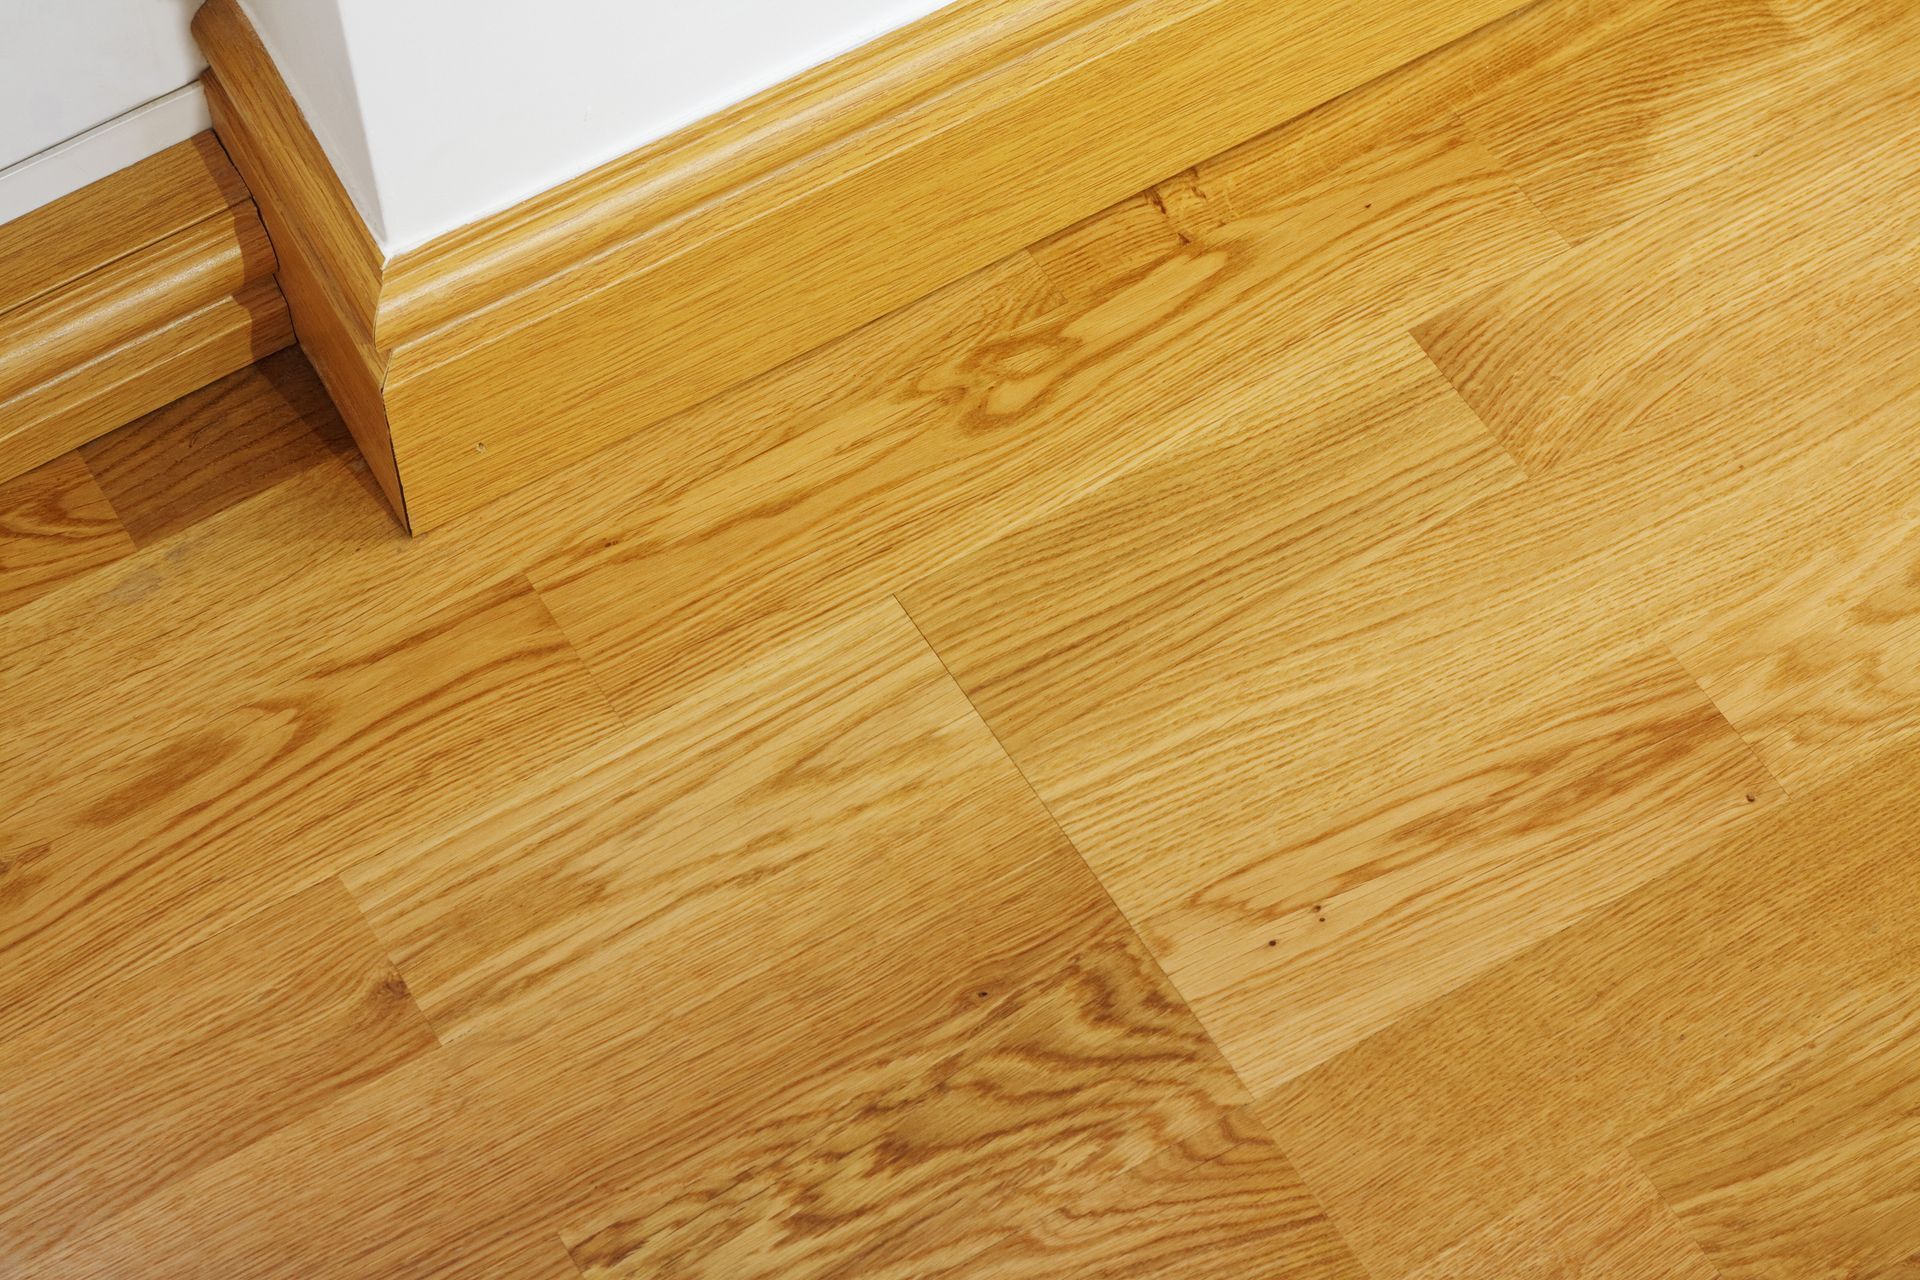 A close up of a wooden floor with a white wall in the background.